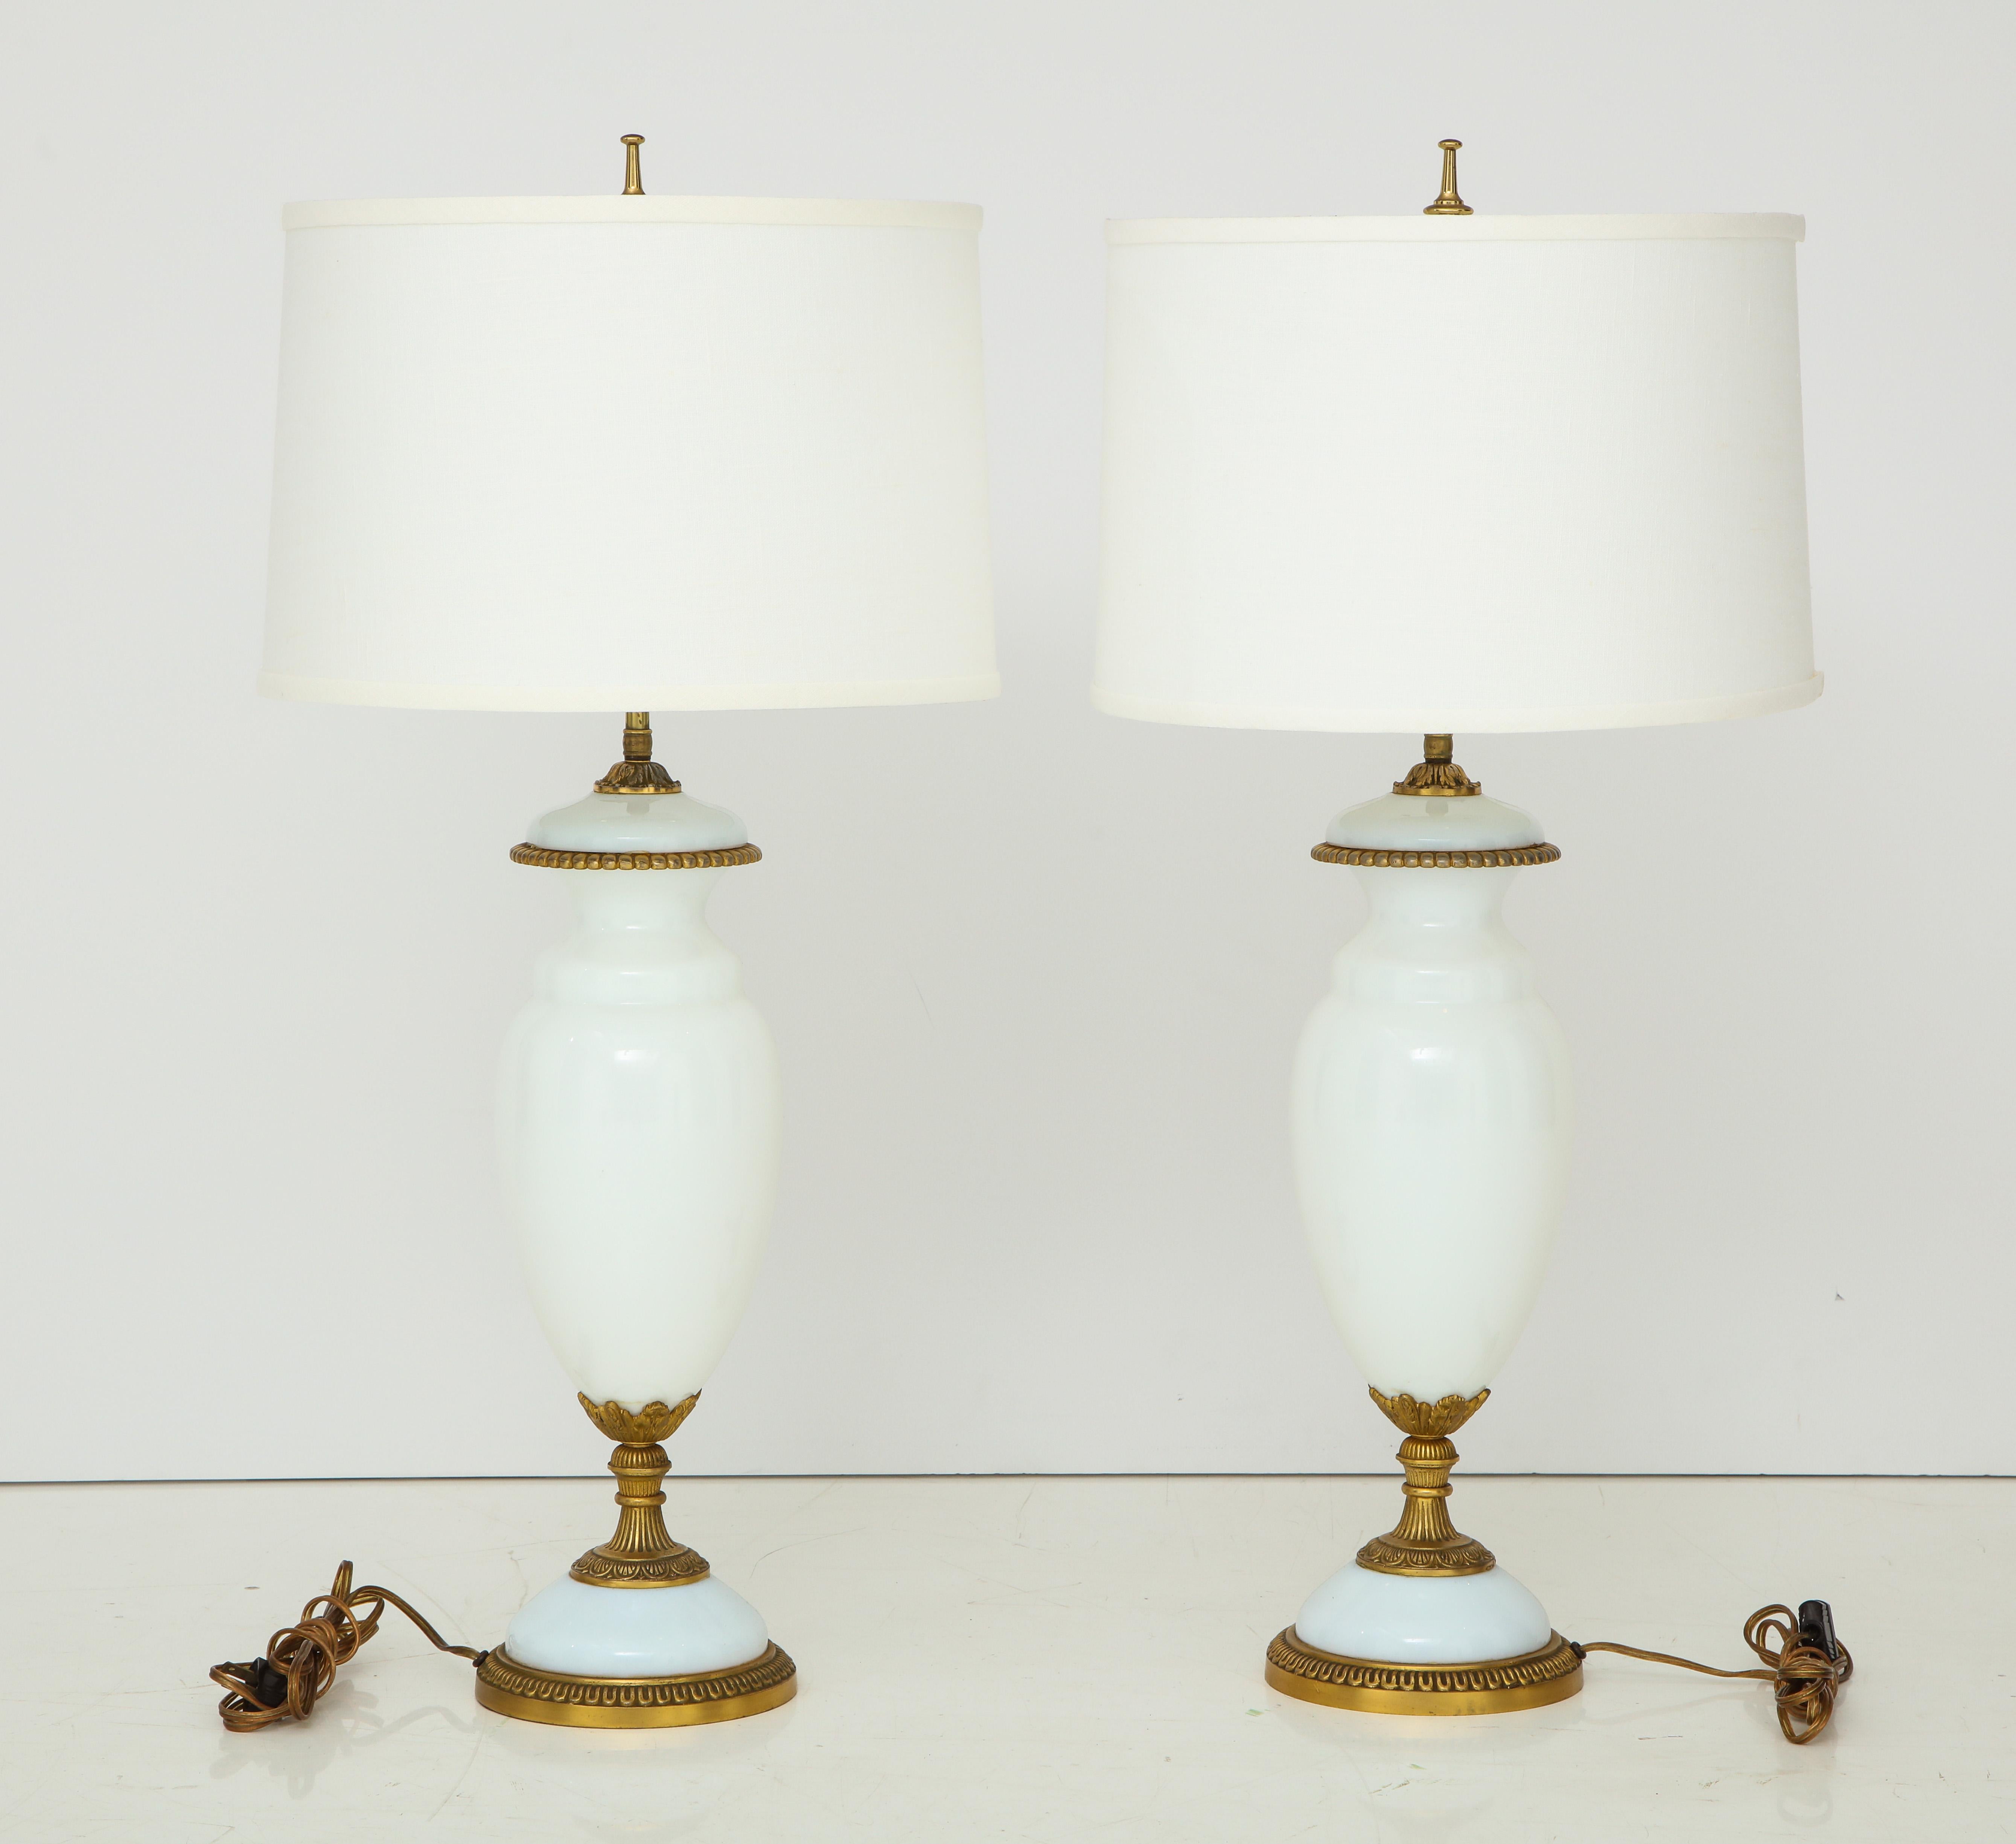 Stunning pair of 1950's Hollywood Regency style milk glass and brass Italian table lamps, in vintage original condition with minor wear and patina due to age and use.